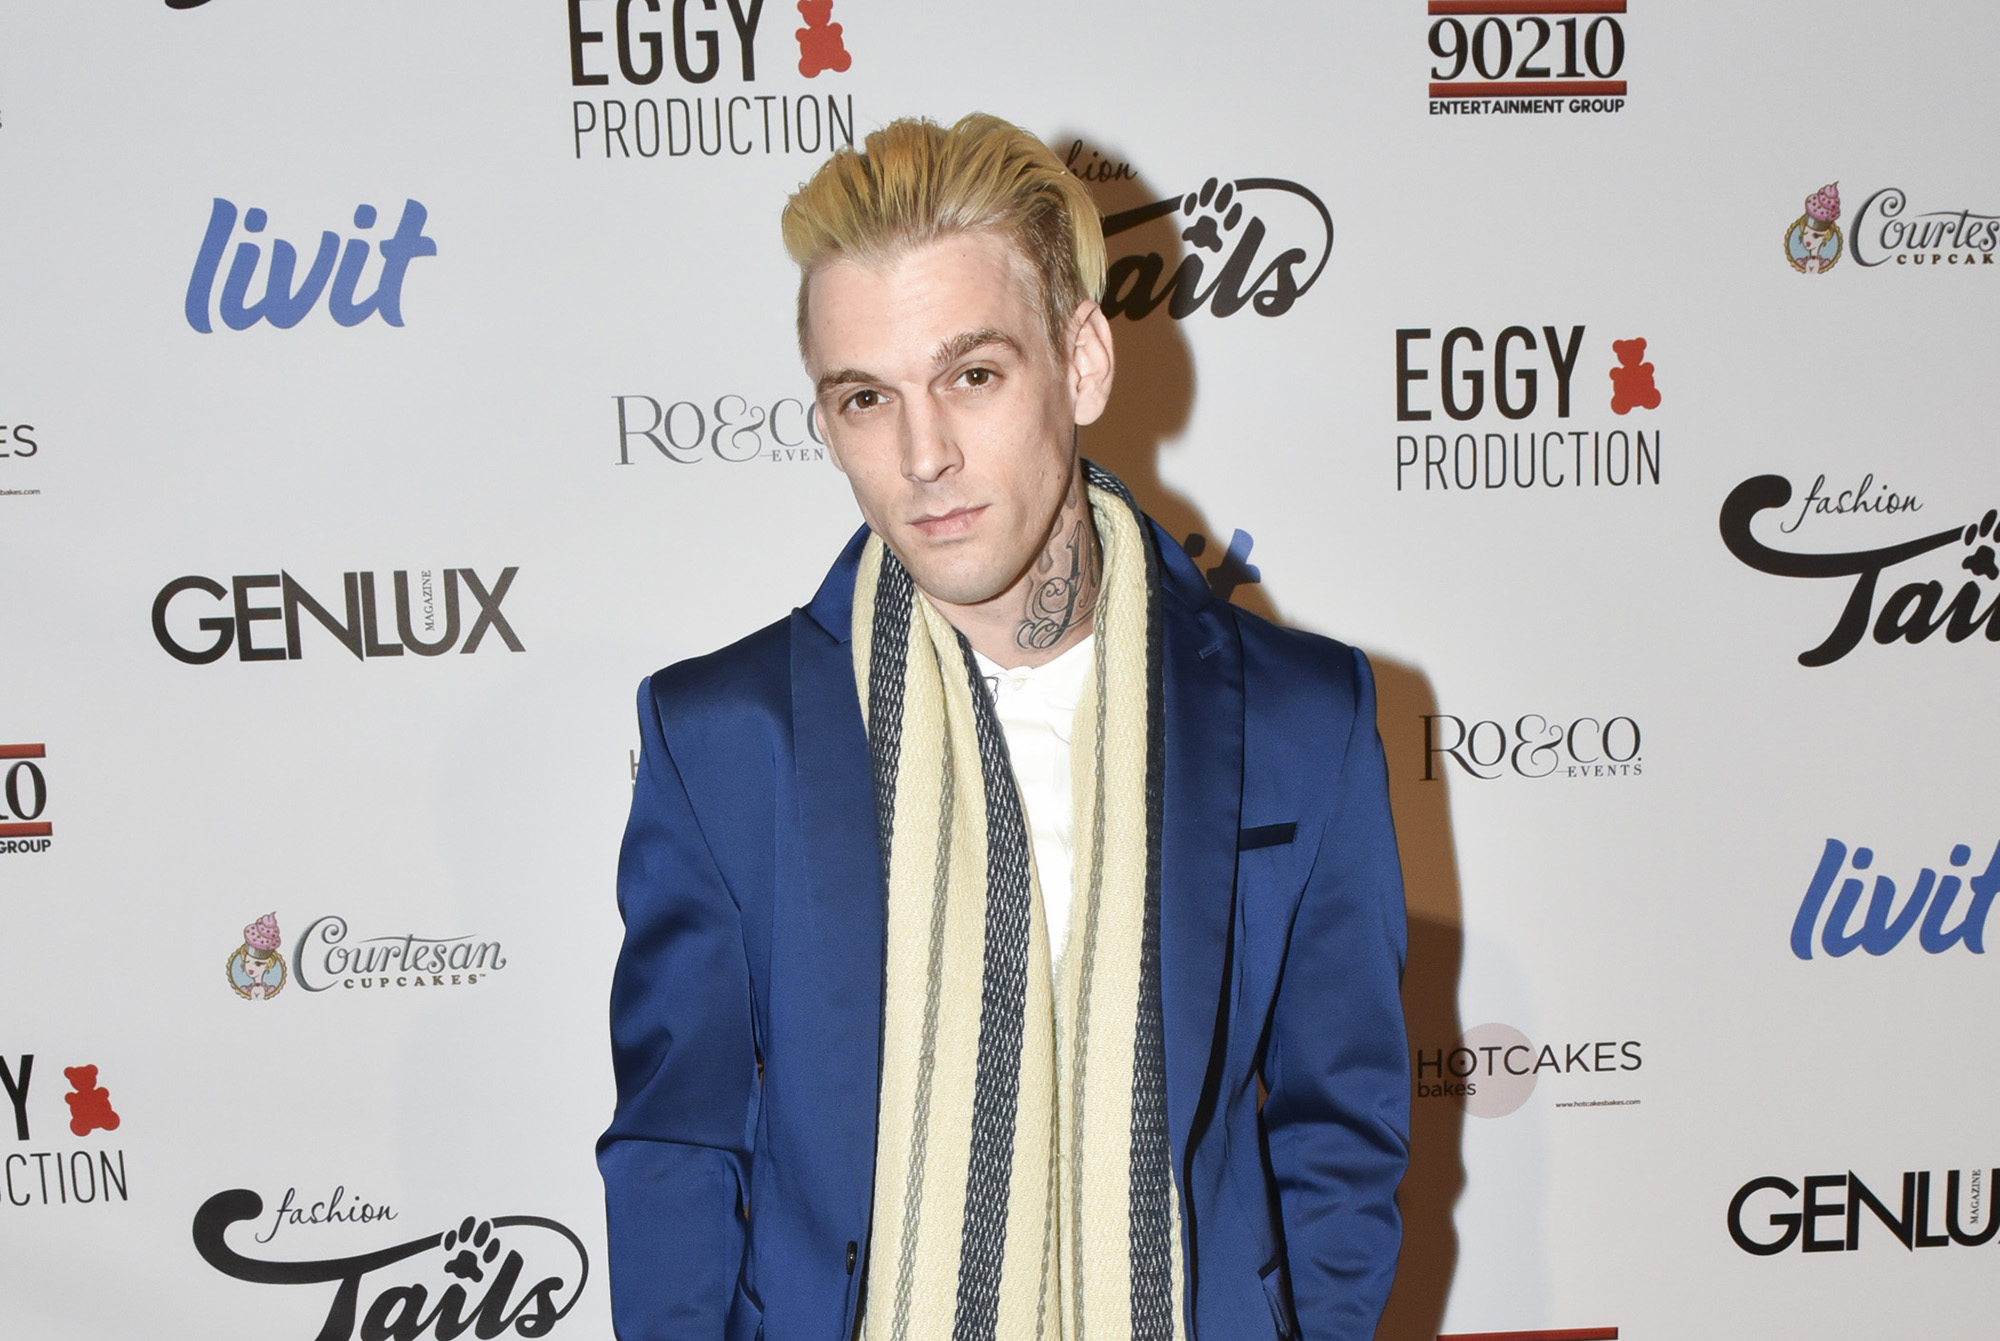 Aaron Carter attends Fashion Tails - Adopt A New Attitude at Lombardi House on October 6, 2016 in Los Angeles, California.  (Photo by Rodin Eckenroth/Getty Images) (Rodin Eckenroth&mdash;Getty Images)